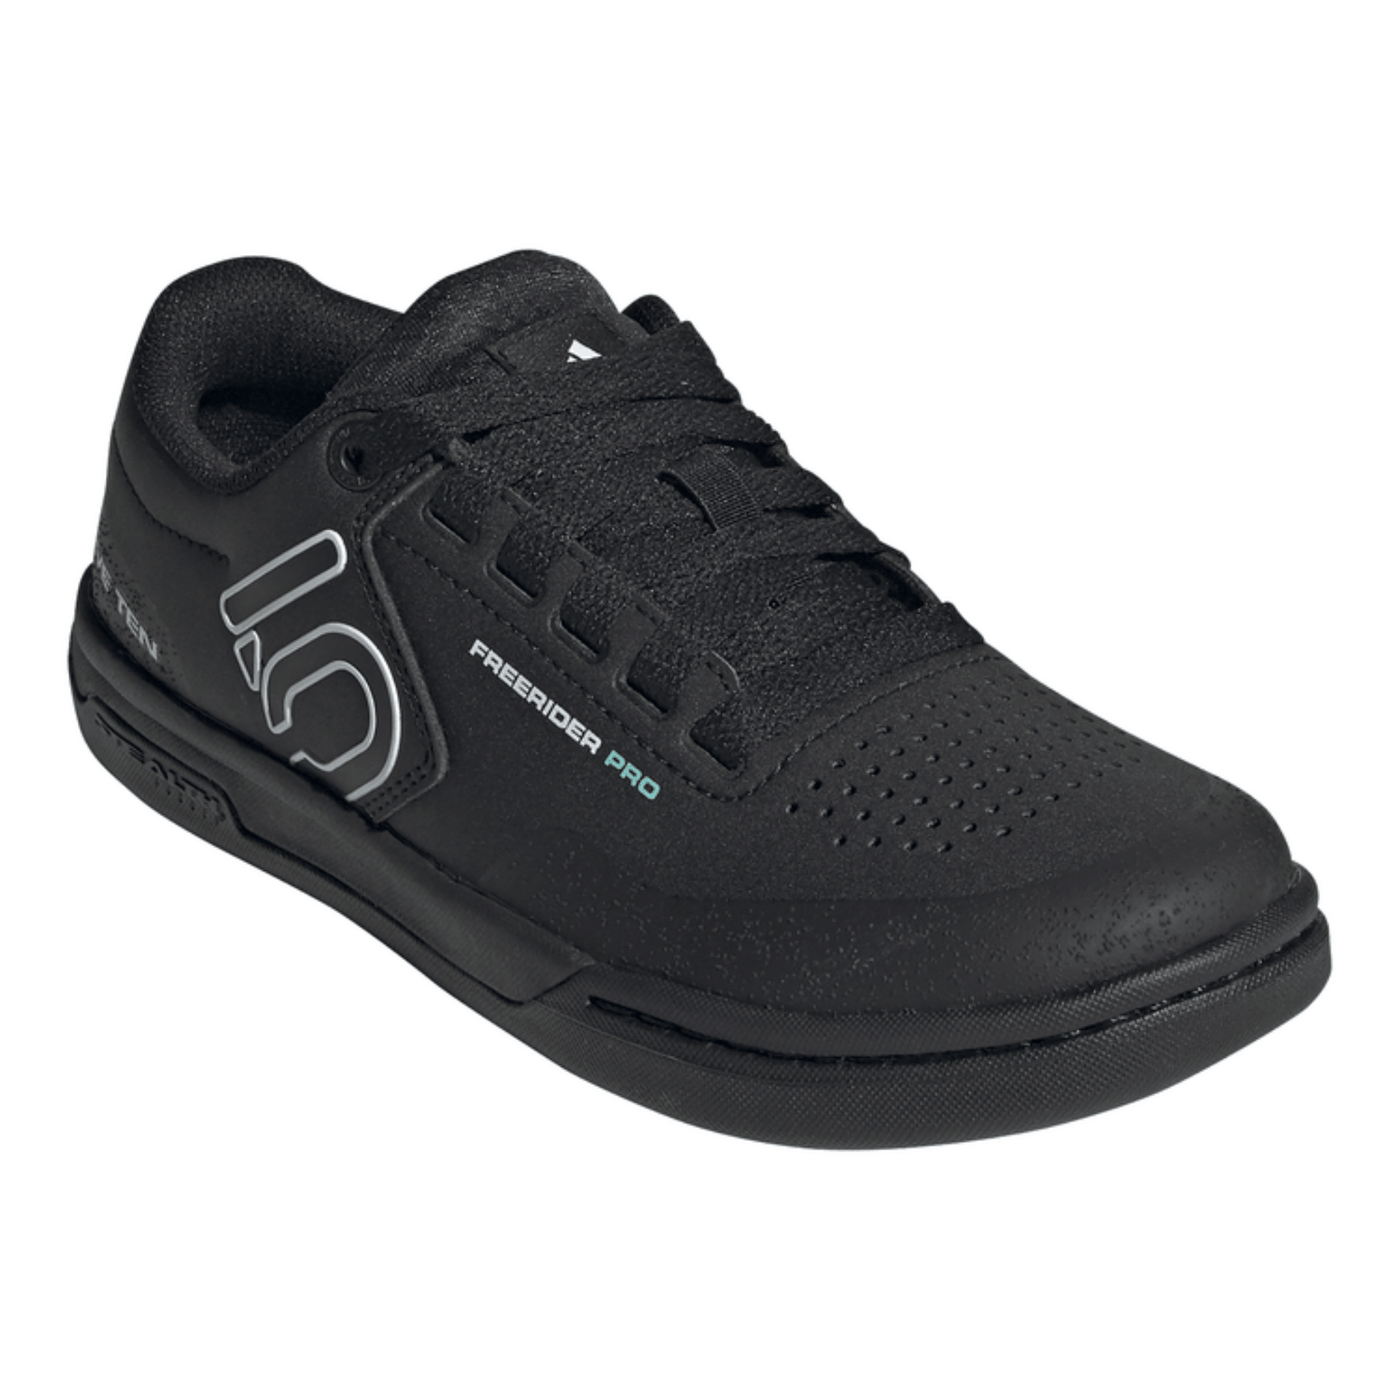 Five Ten Shoes Freerider PRO W - Core Black / Crystal White / Acid Mint 8Lines Shop - Fast Shipping